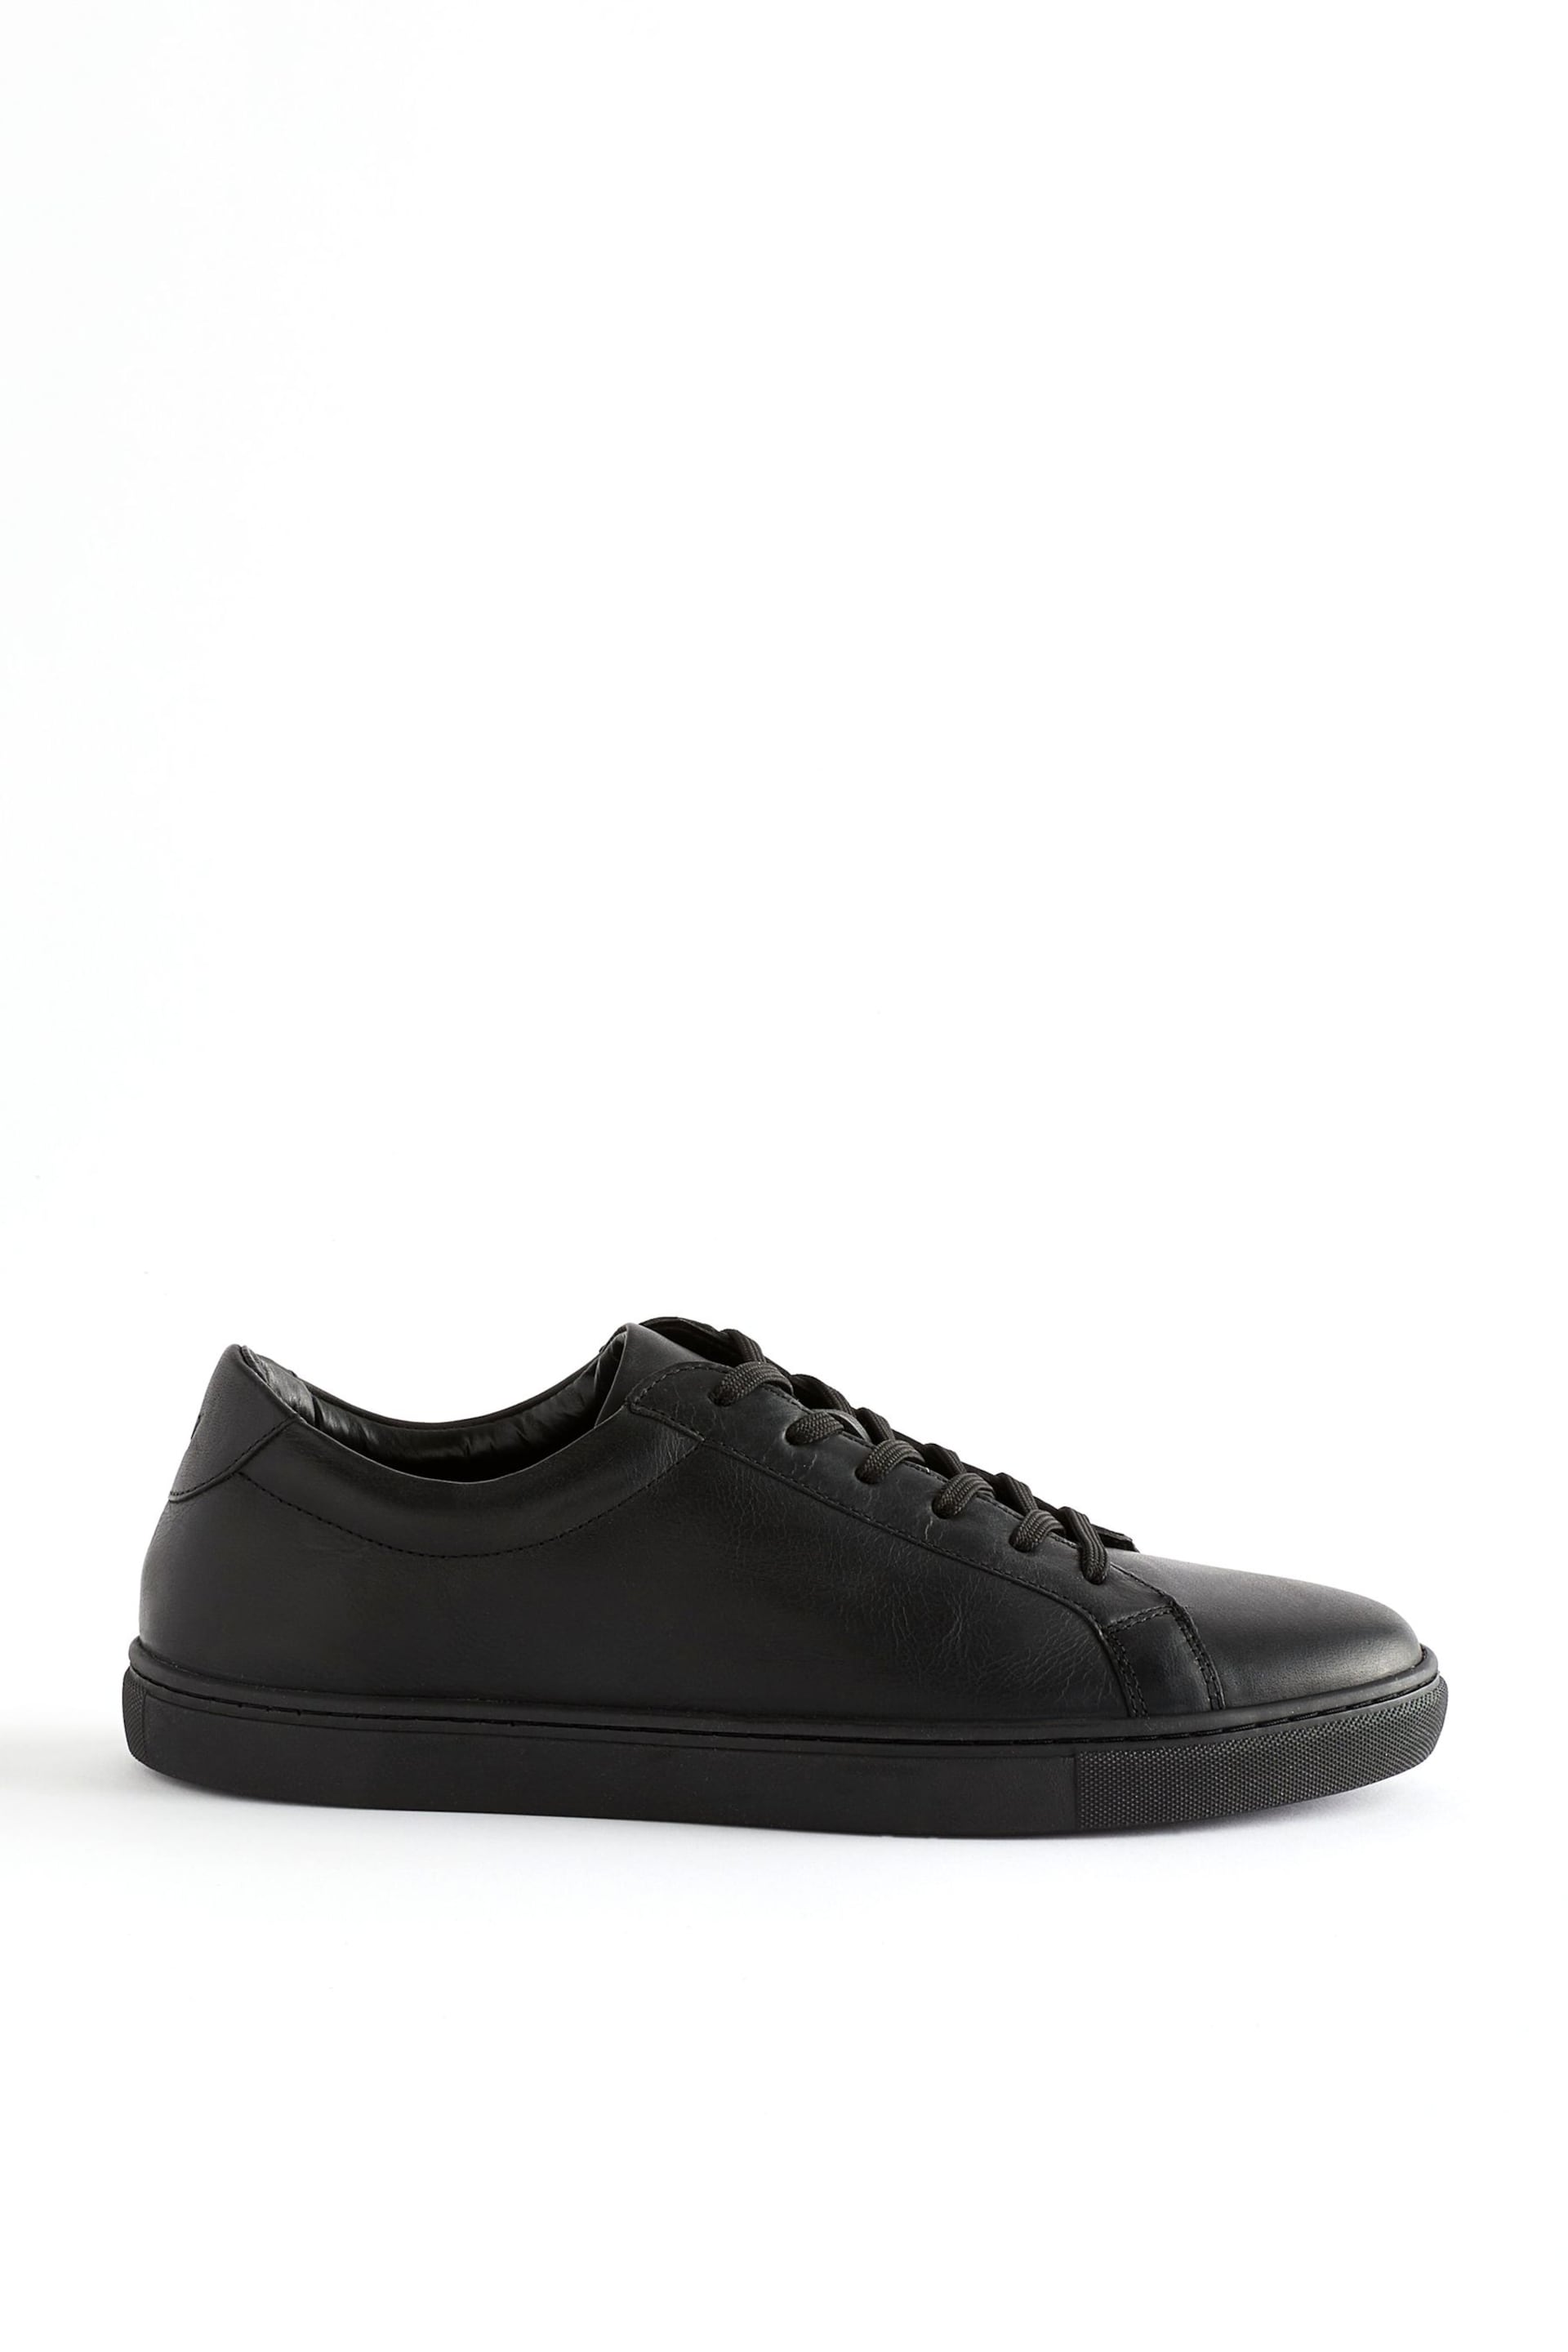 Black Leather Trainers - Image 3 of 5